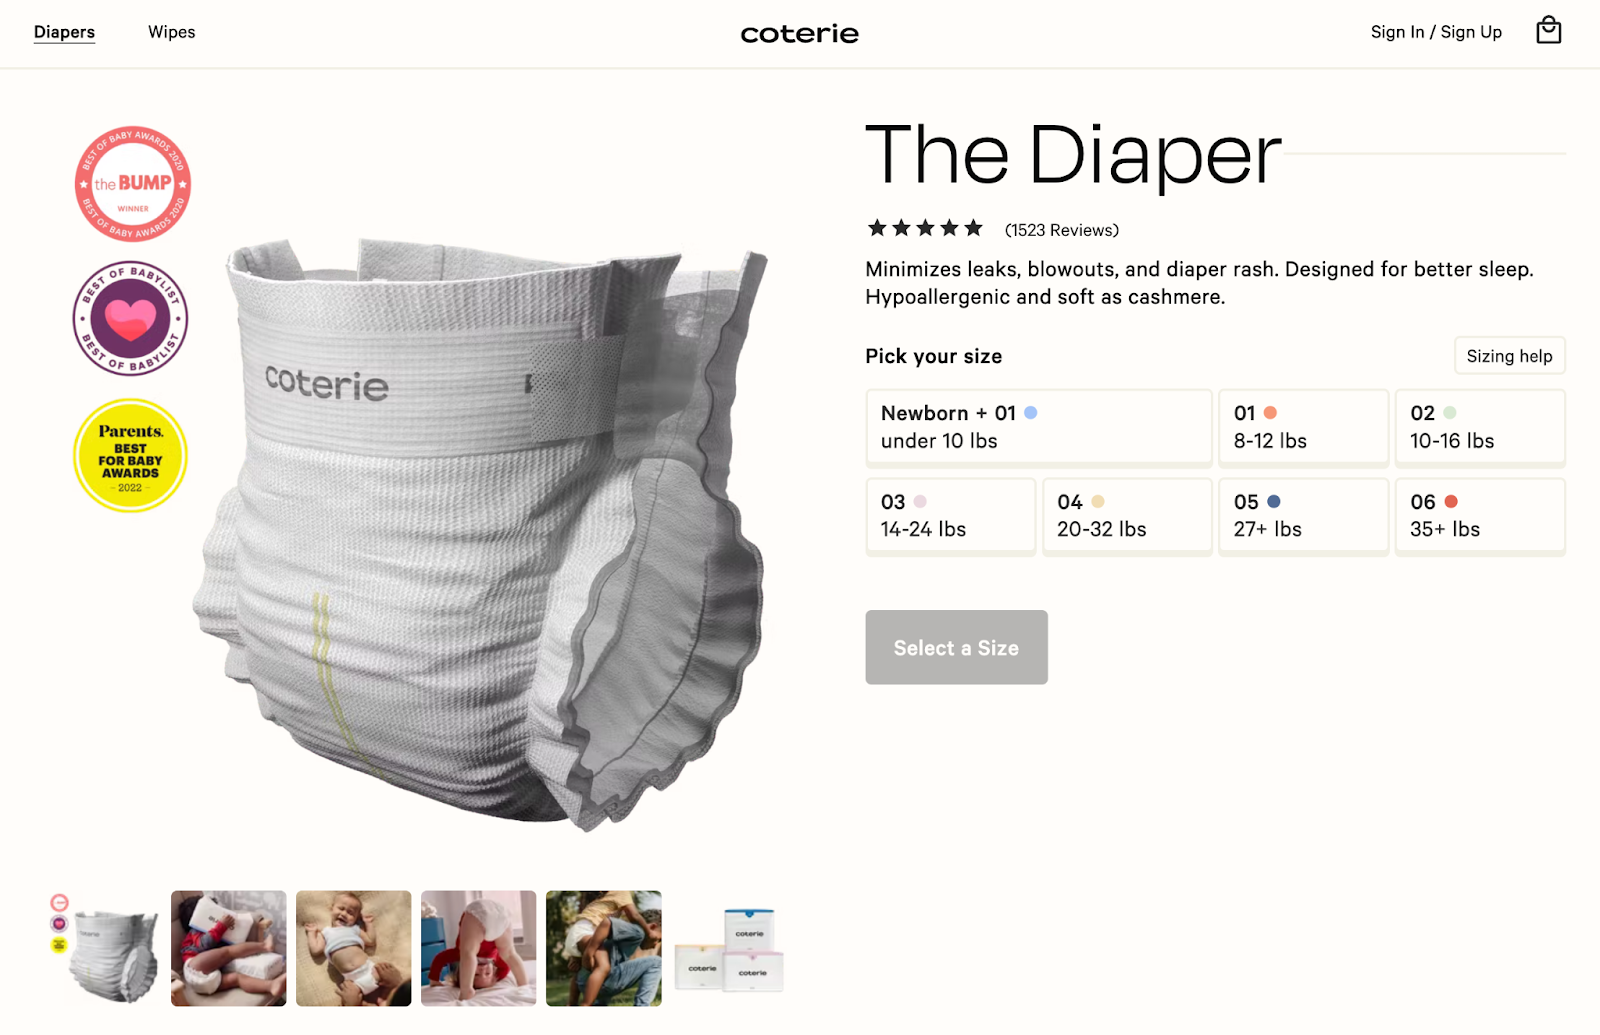 Coterie's The Diaper product page